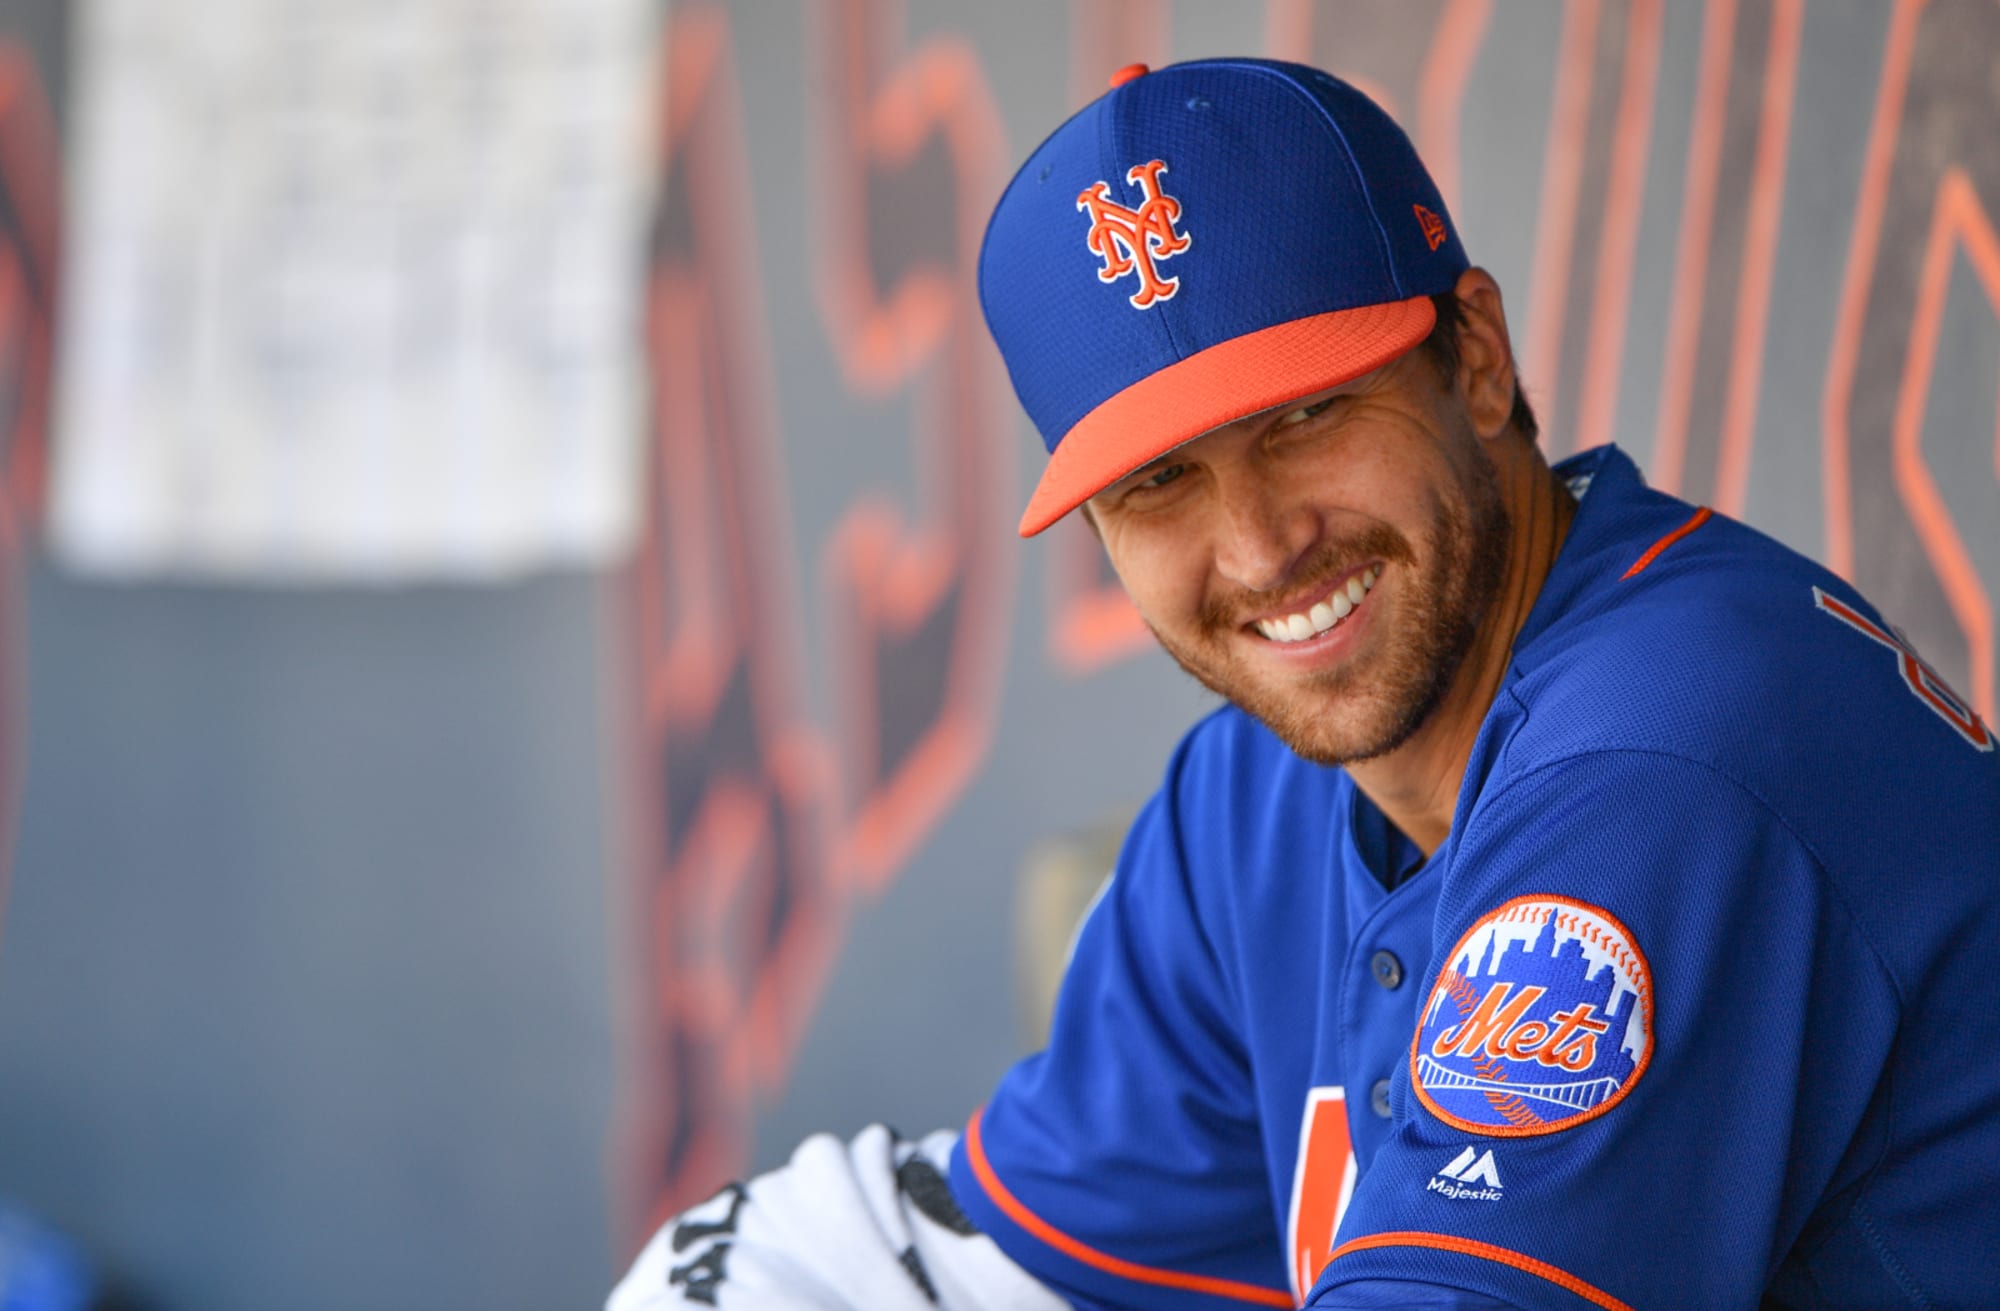 New York Mets: Could Jacob deGrom win MVP this year?